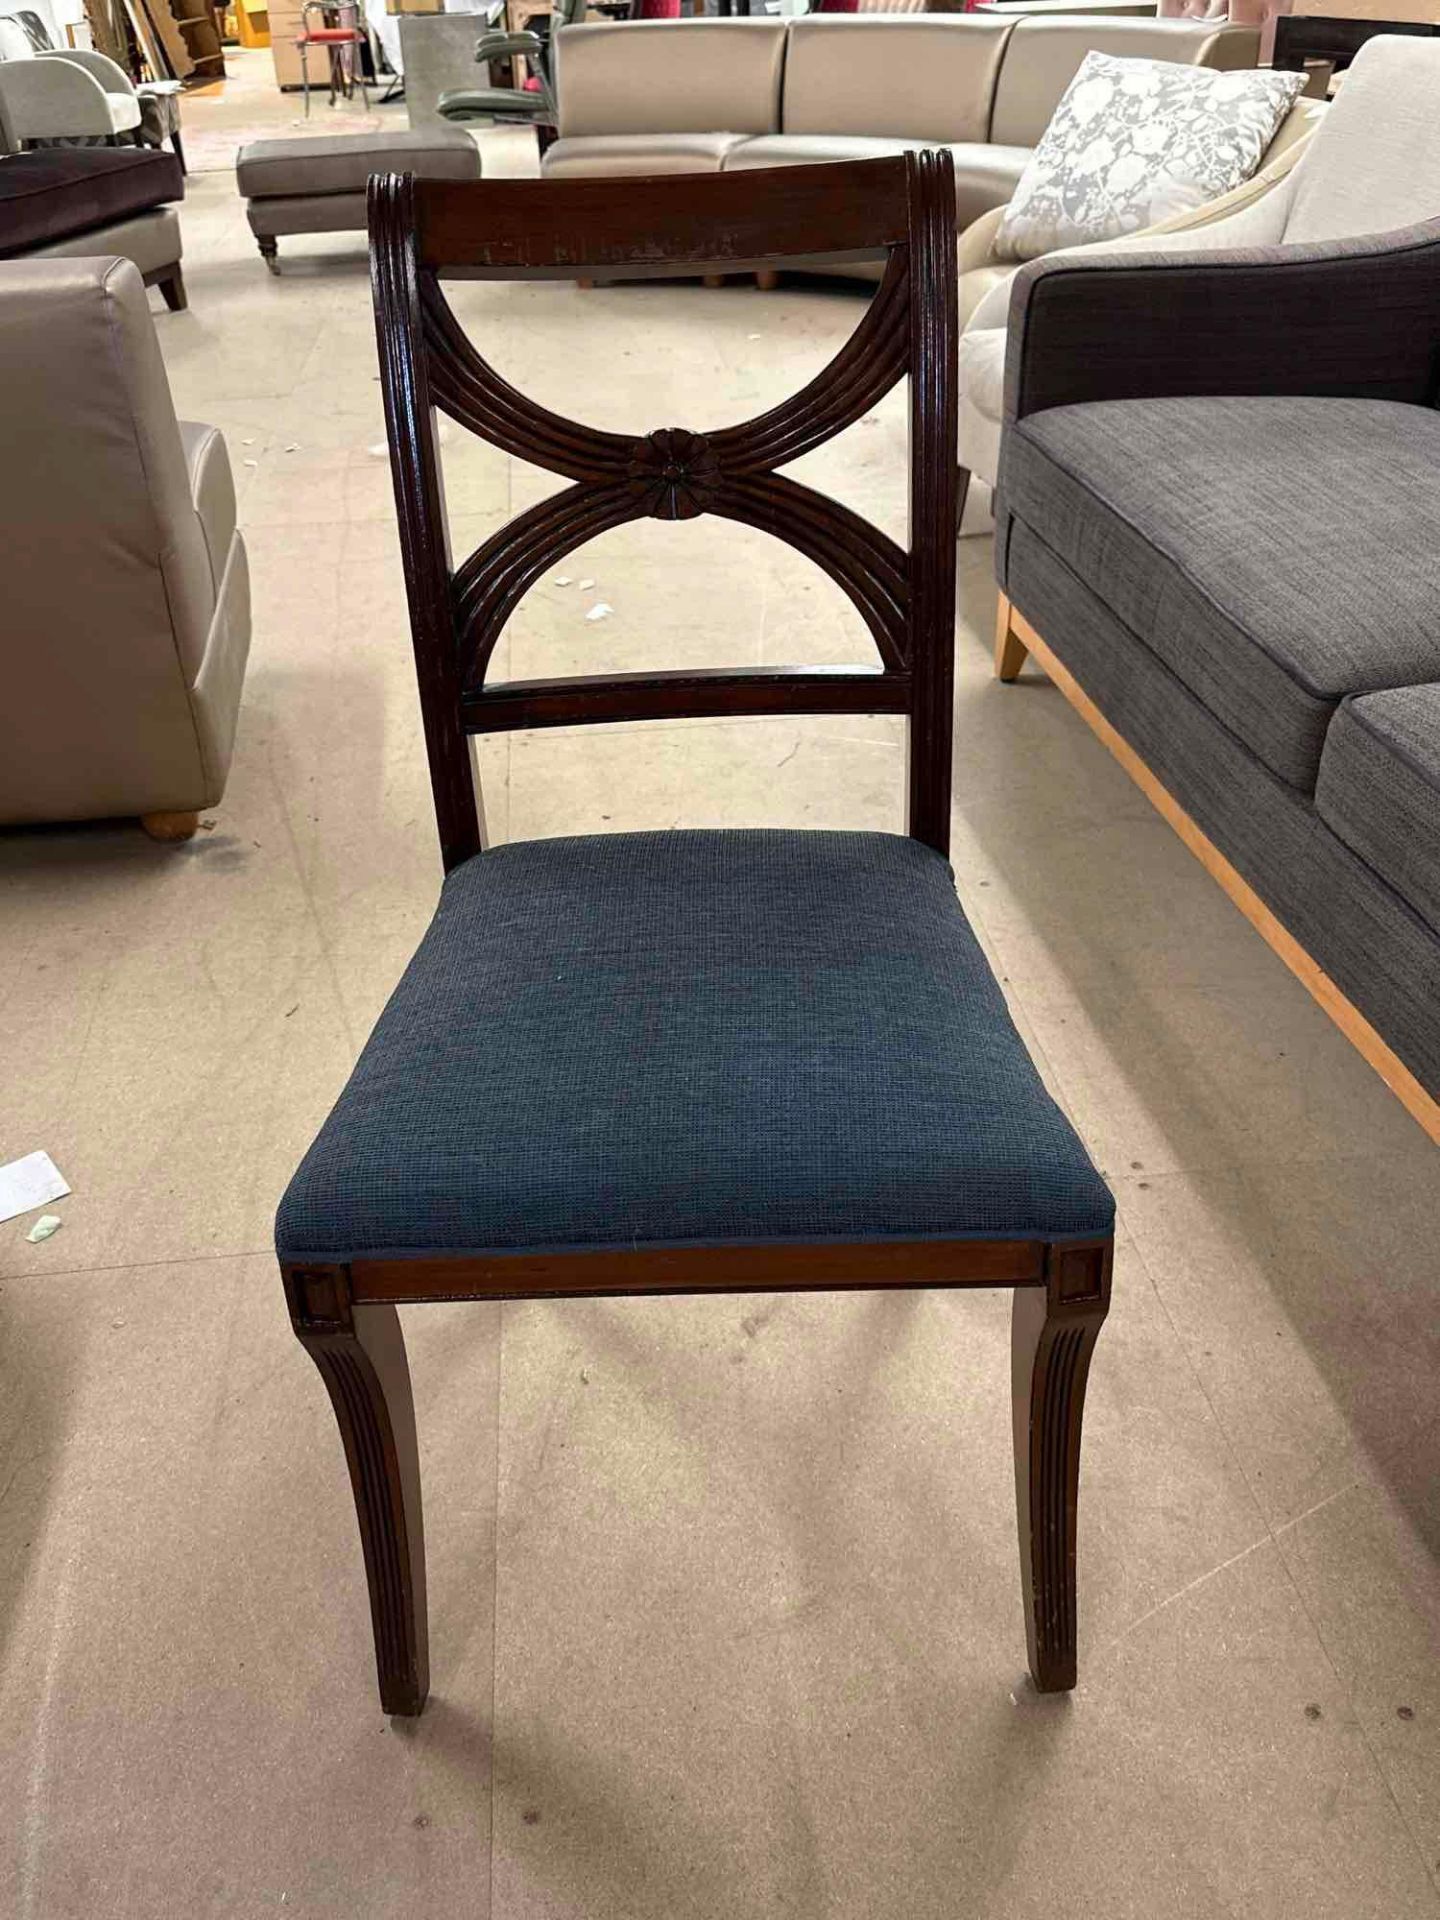 A Pair Of Wooden Carved Dining Chair With Upholstered Blue Seat, 48 x 46 x 95cm